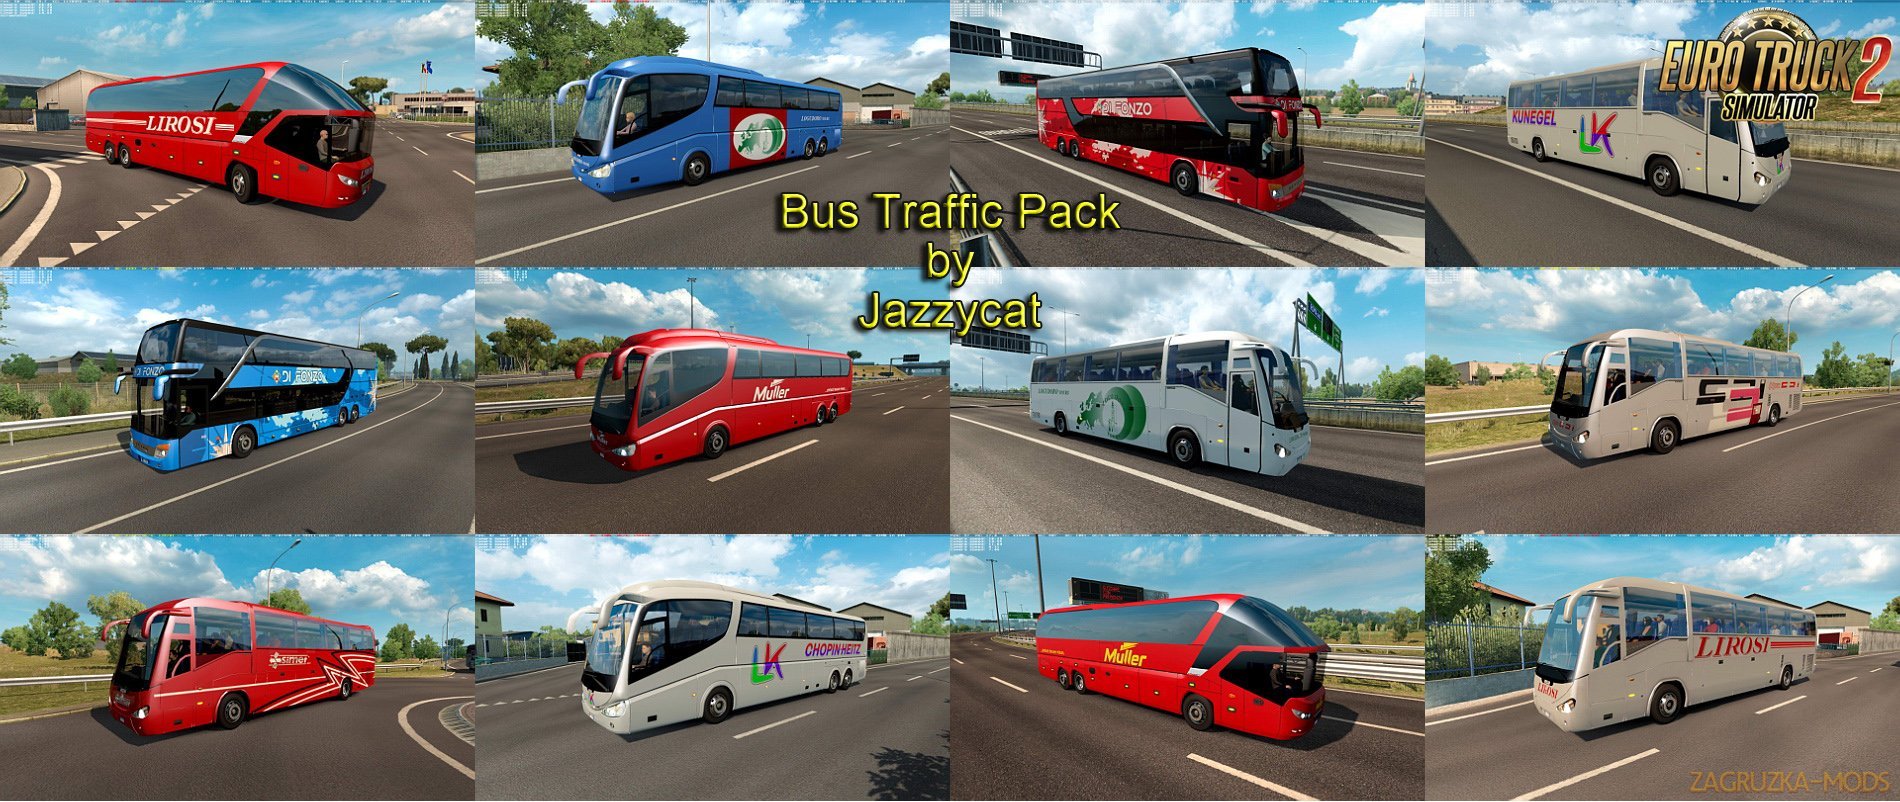 Bus Traffic Pack v3.2 by Jazzycat